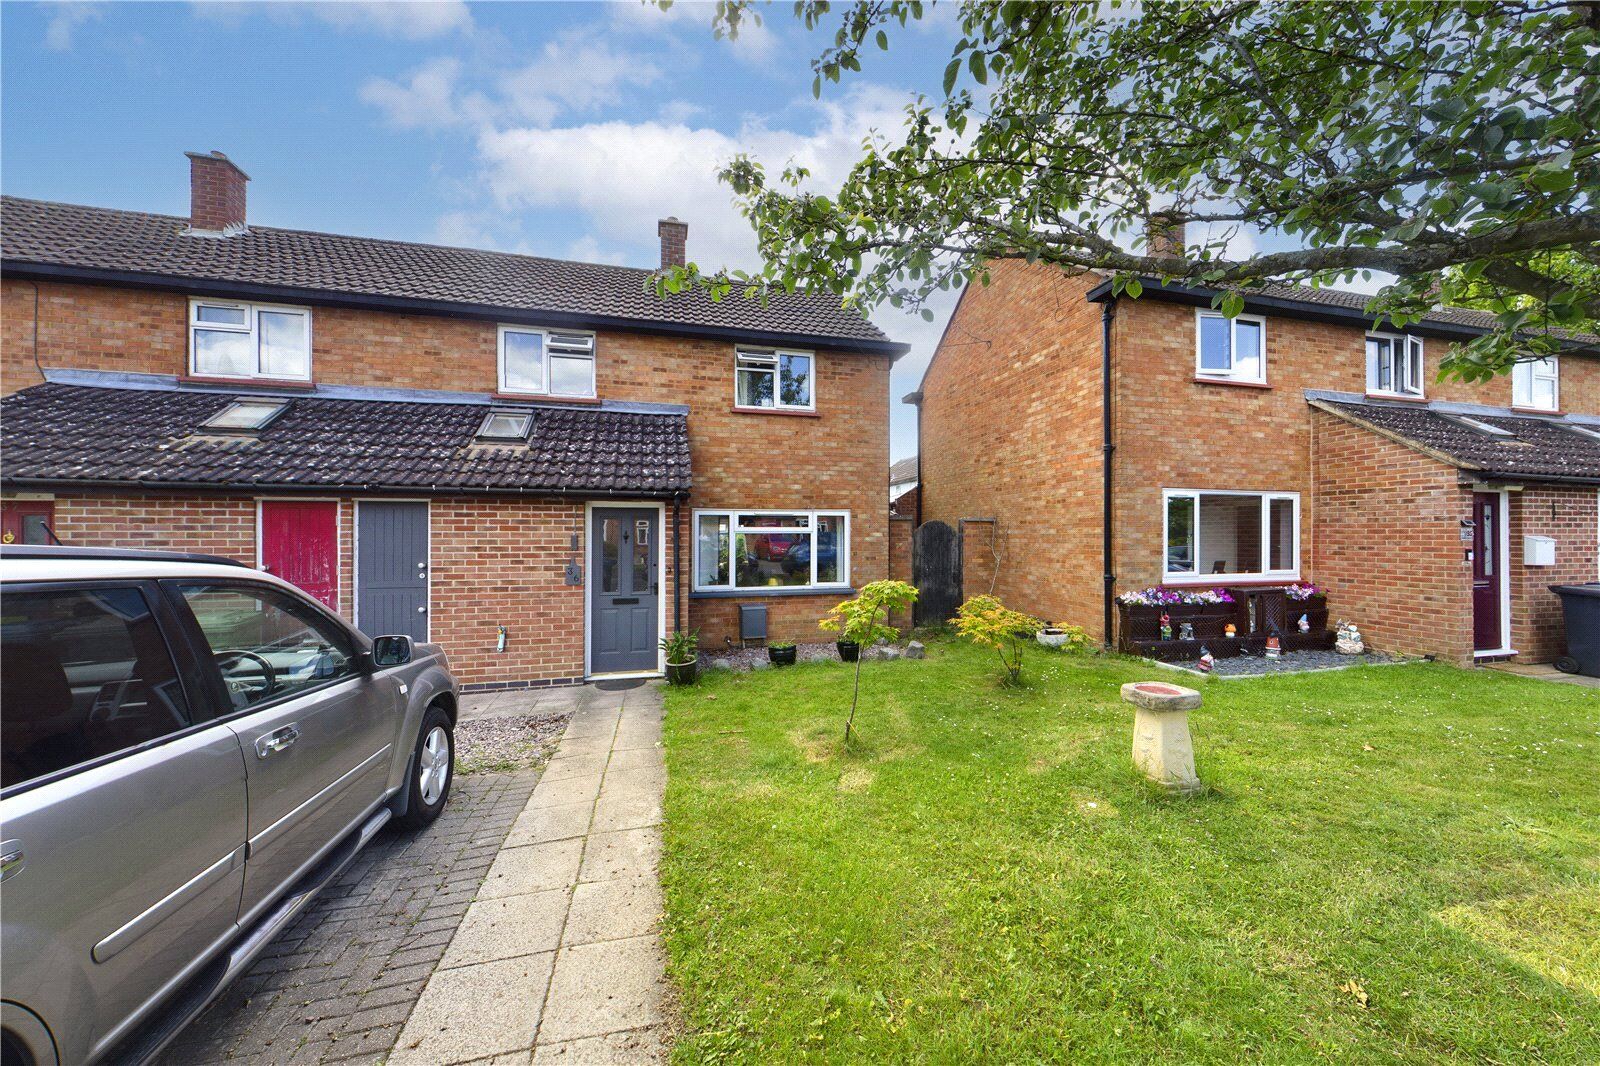 3 bedroom end terraced house for sale Bath Crescent, Wyton, PE28, main image